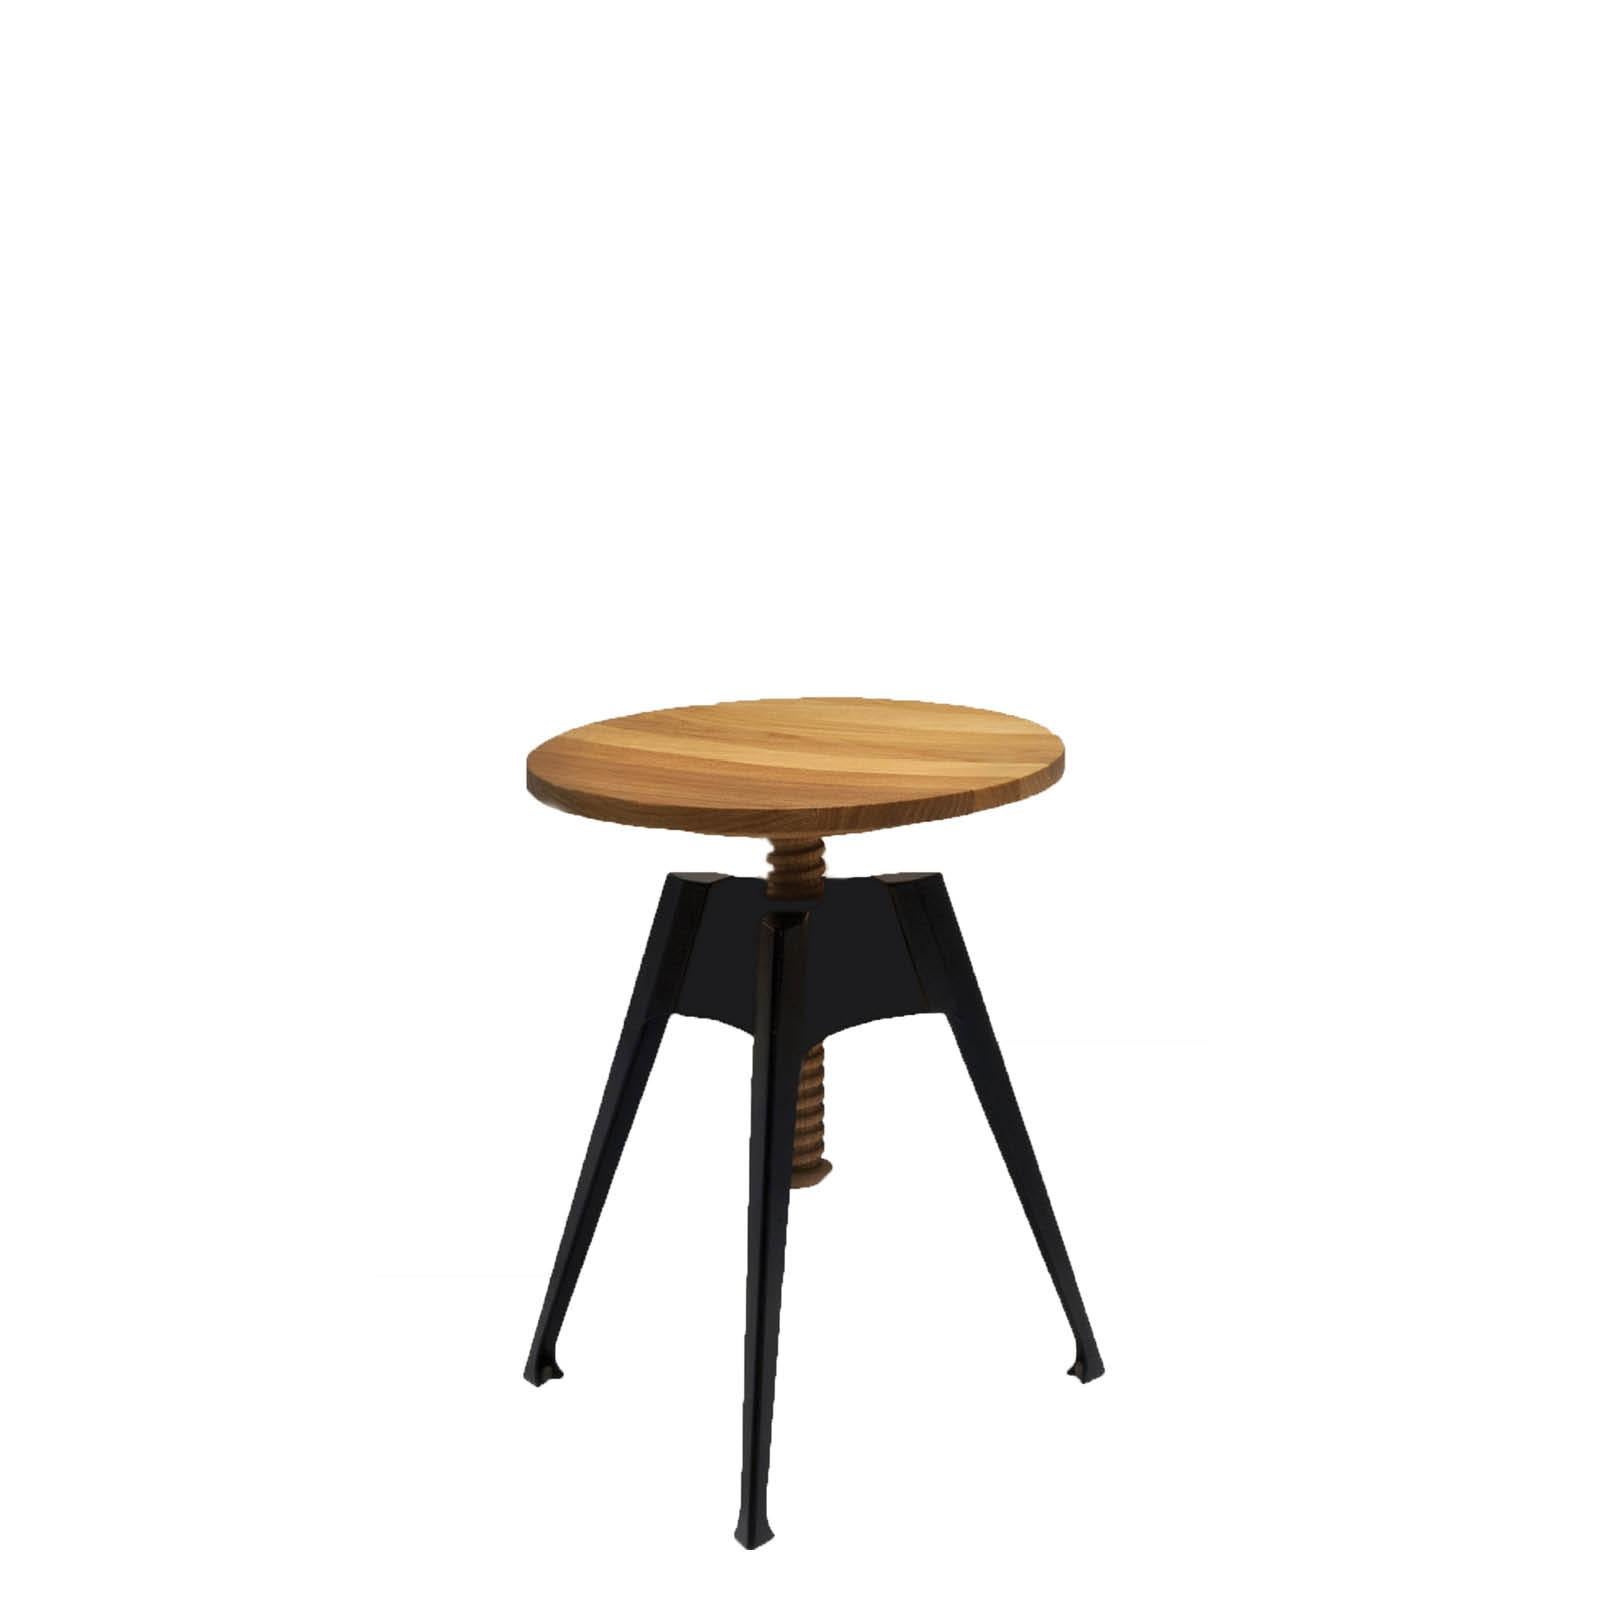 Stool adjustable in heigh. Black matt painted steel structure. Seat and components in massive oak. Indoor use only.

Philippe Nigro designed a light looking desk: a top in birch plywood, oak veneered, and a flapdoor opening style set on a